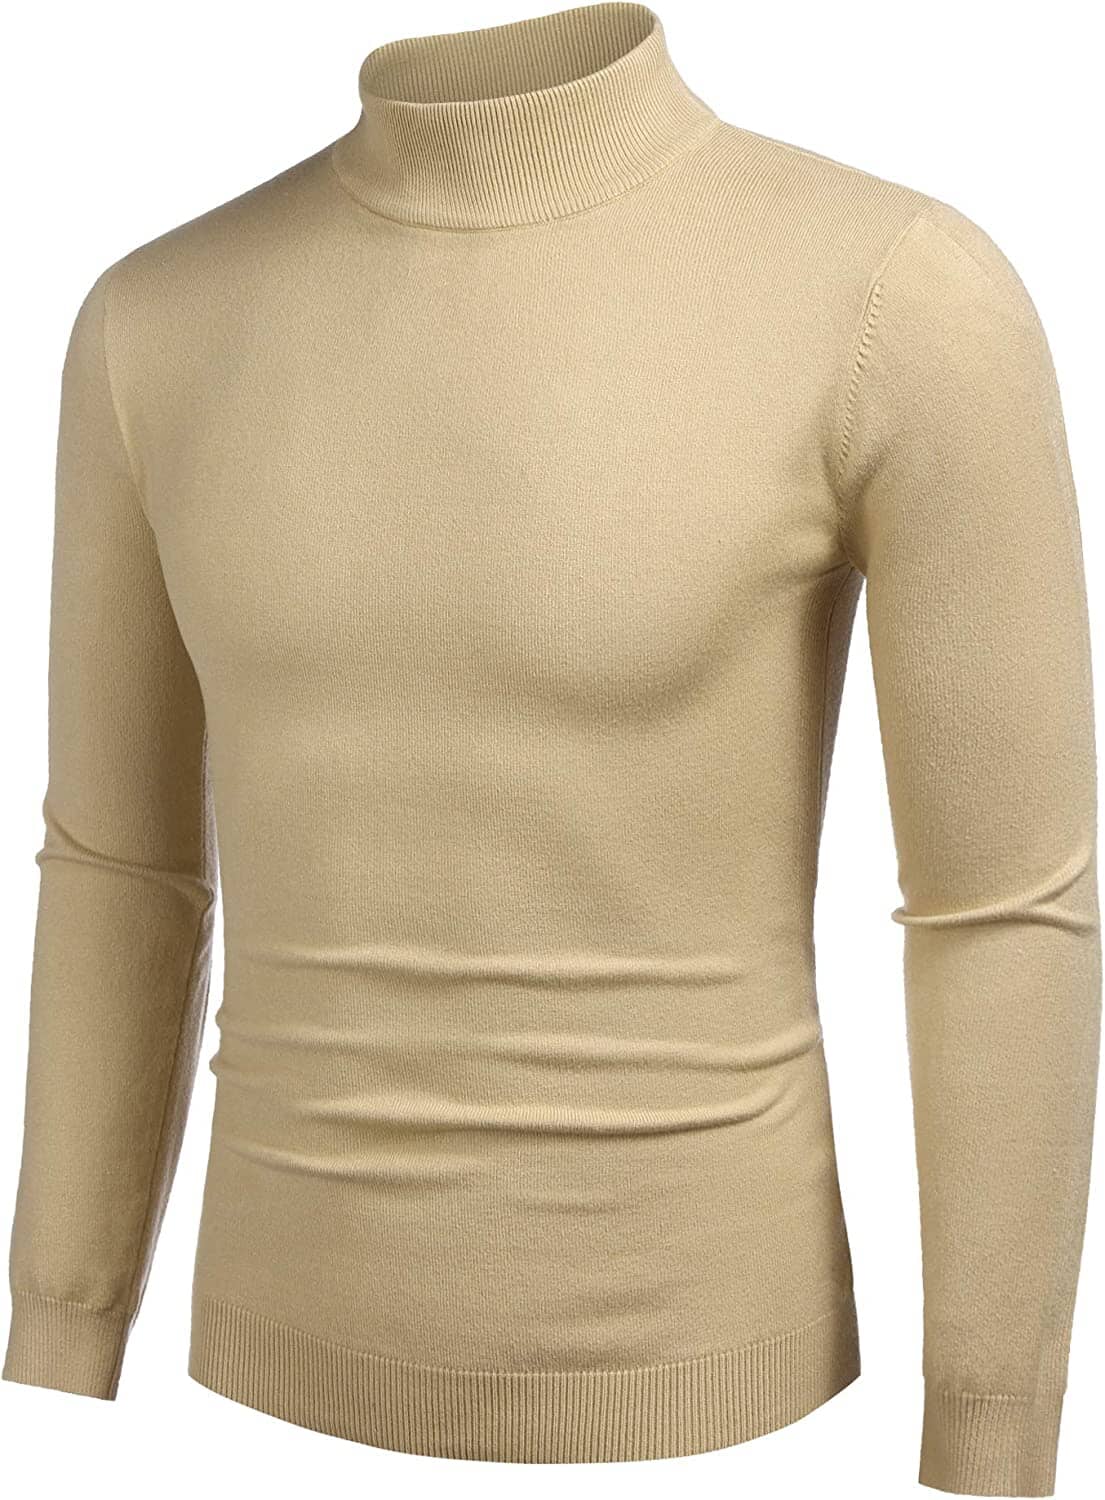 Turtleneck Pullover Basic Knitted Thermal Sweaters (US Only) Sweaters COOFANDY Store Khaki S 